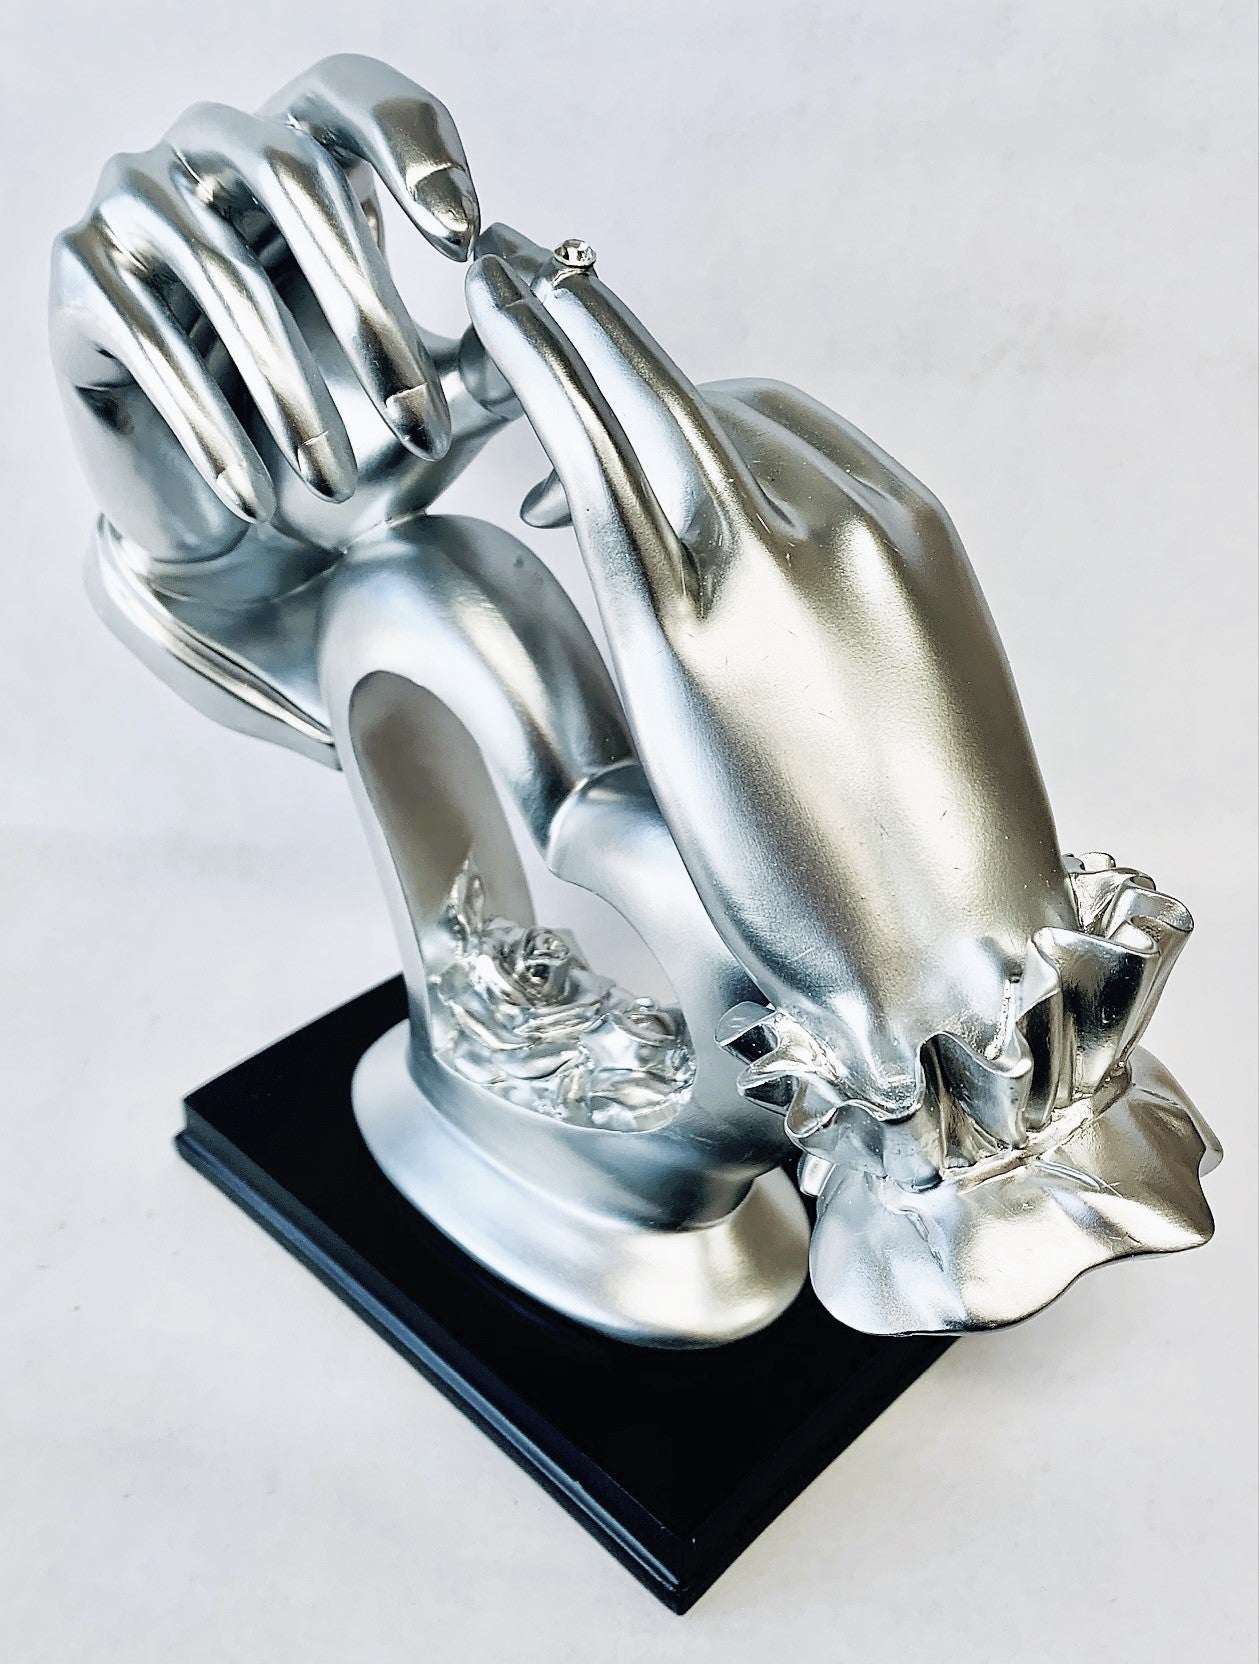 Engagement - Wedding Hands Silver Color On Black Base 10"wide X 4"deep X 10"high